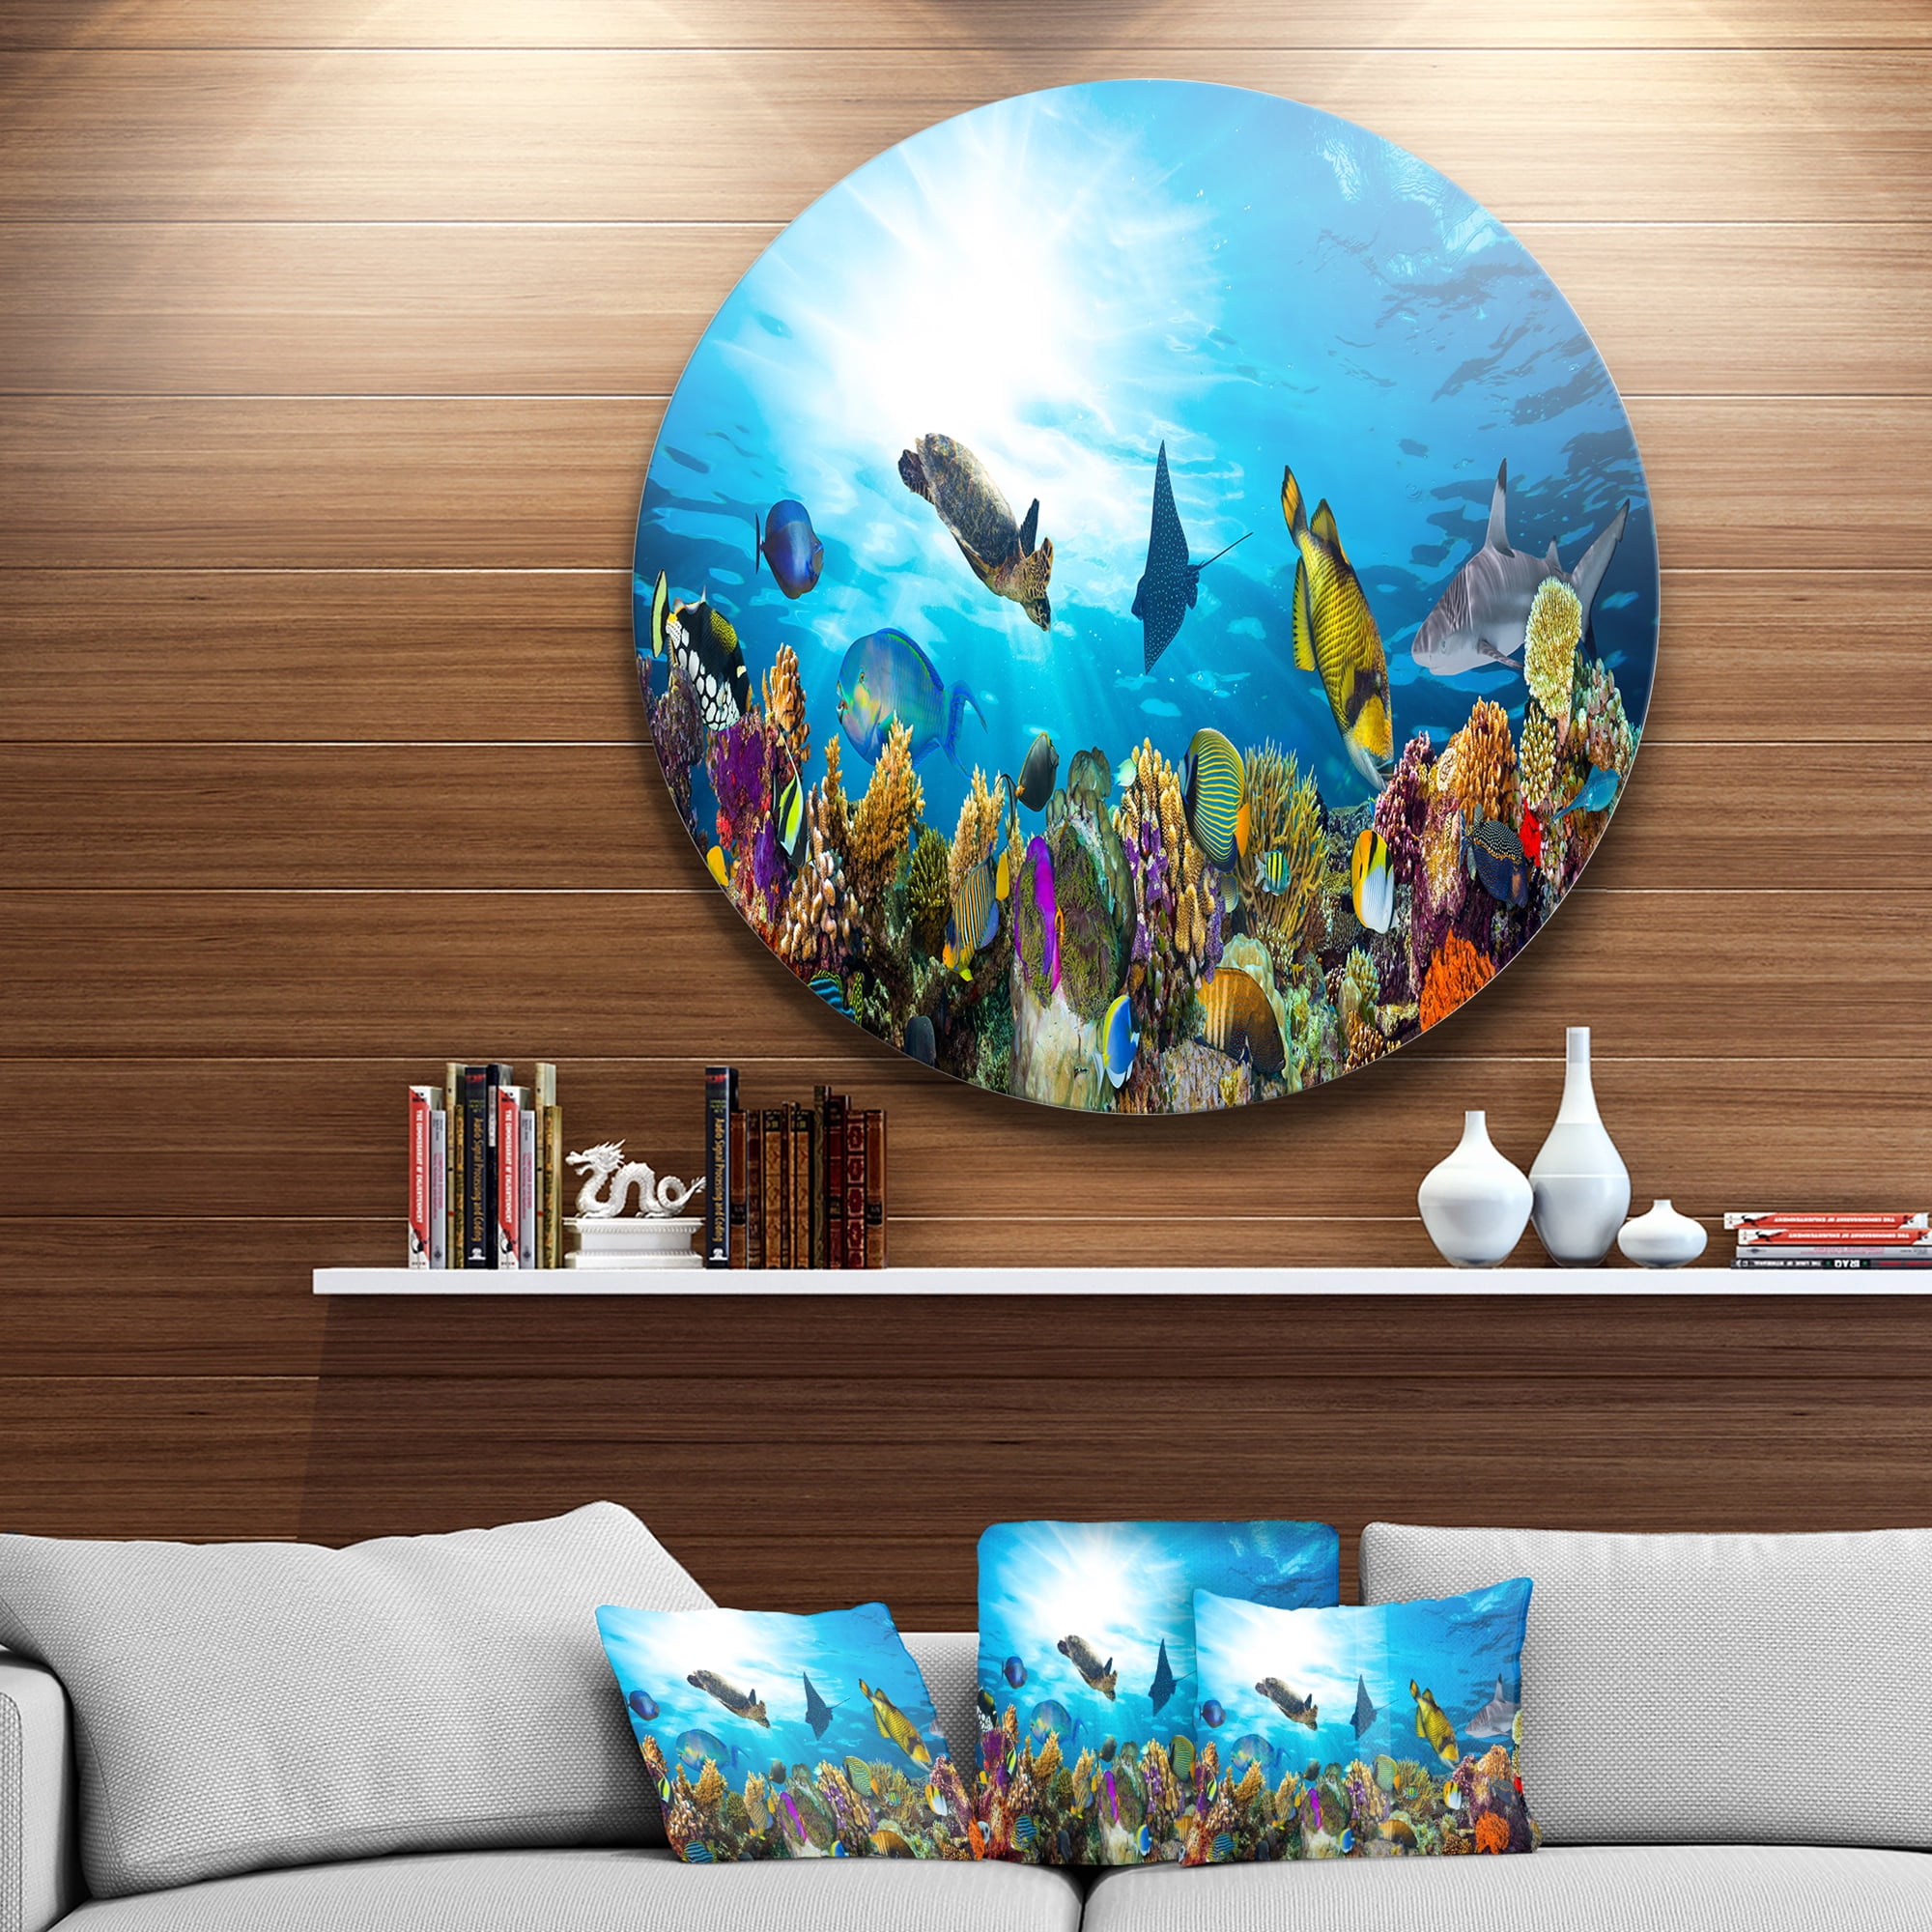 Designart 'Coral Reef Fishes With Turquoise Ocean Spiral' Nautical &  Coastal Circle Metal Wall Art 36x36 - Disc of 36 